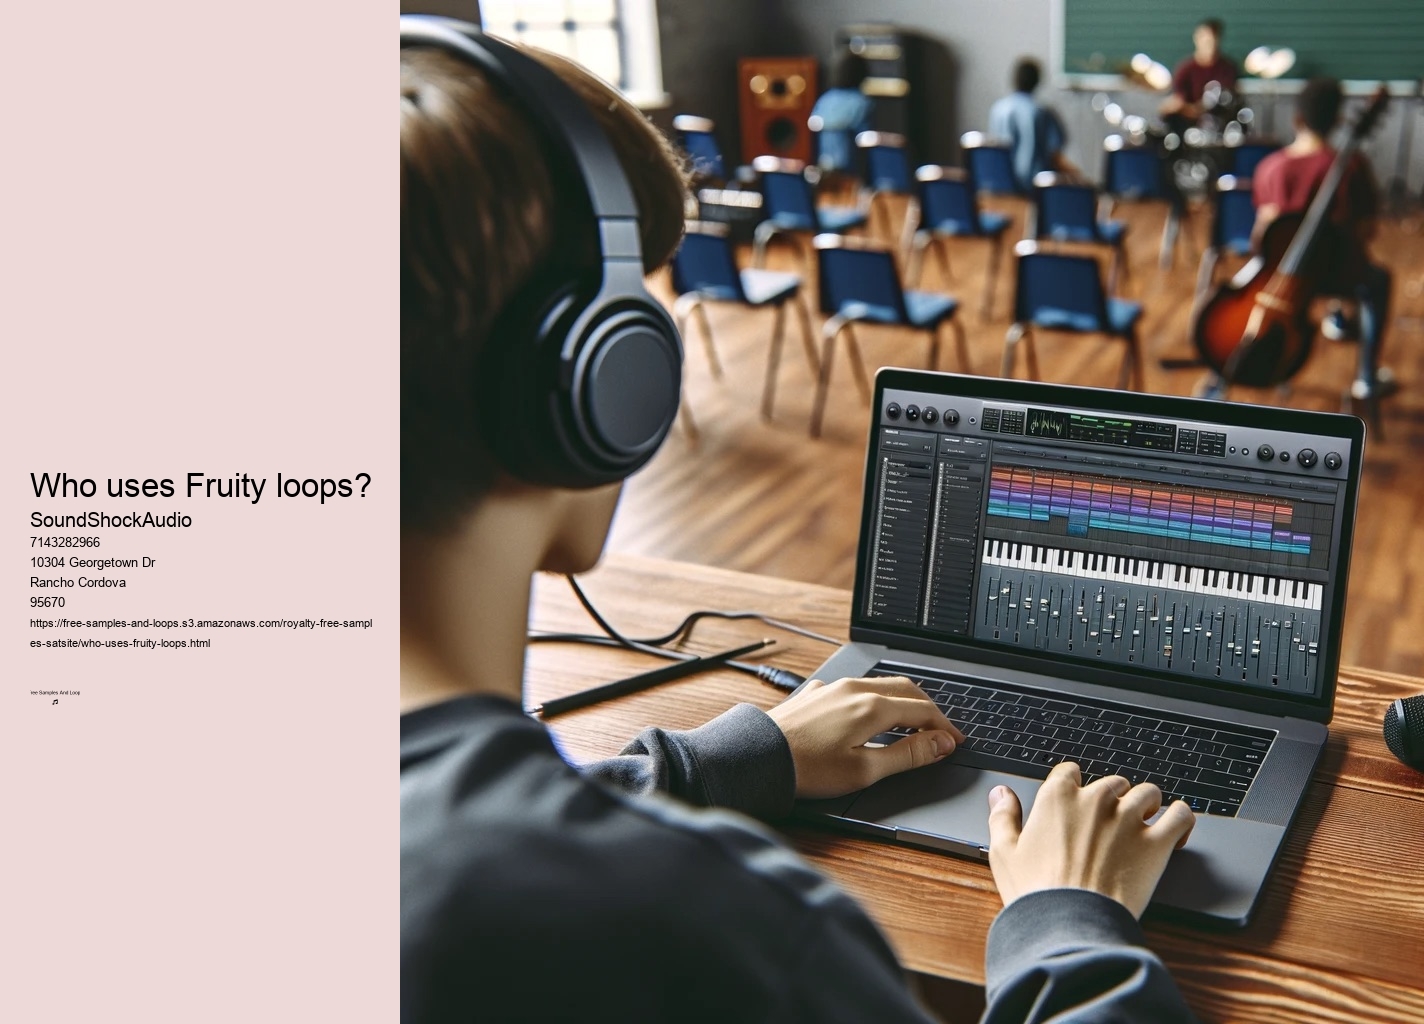 Who uses Fruity loops?